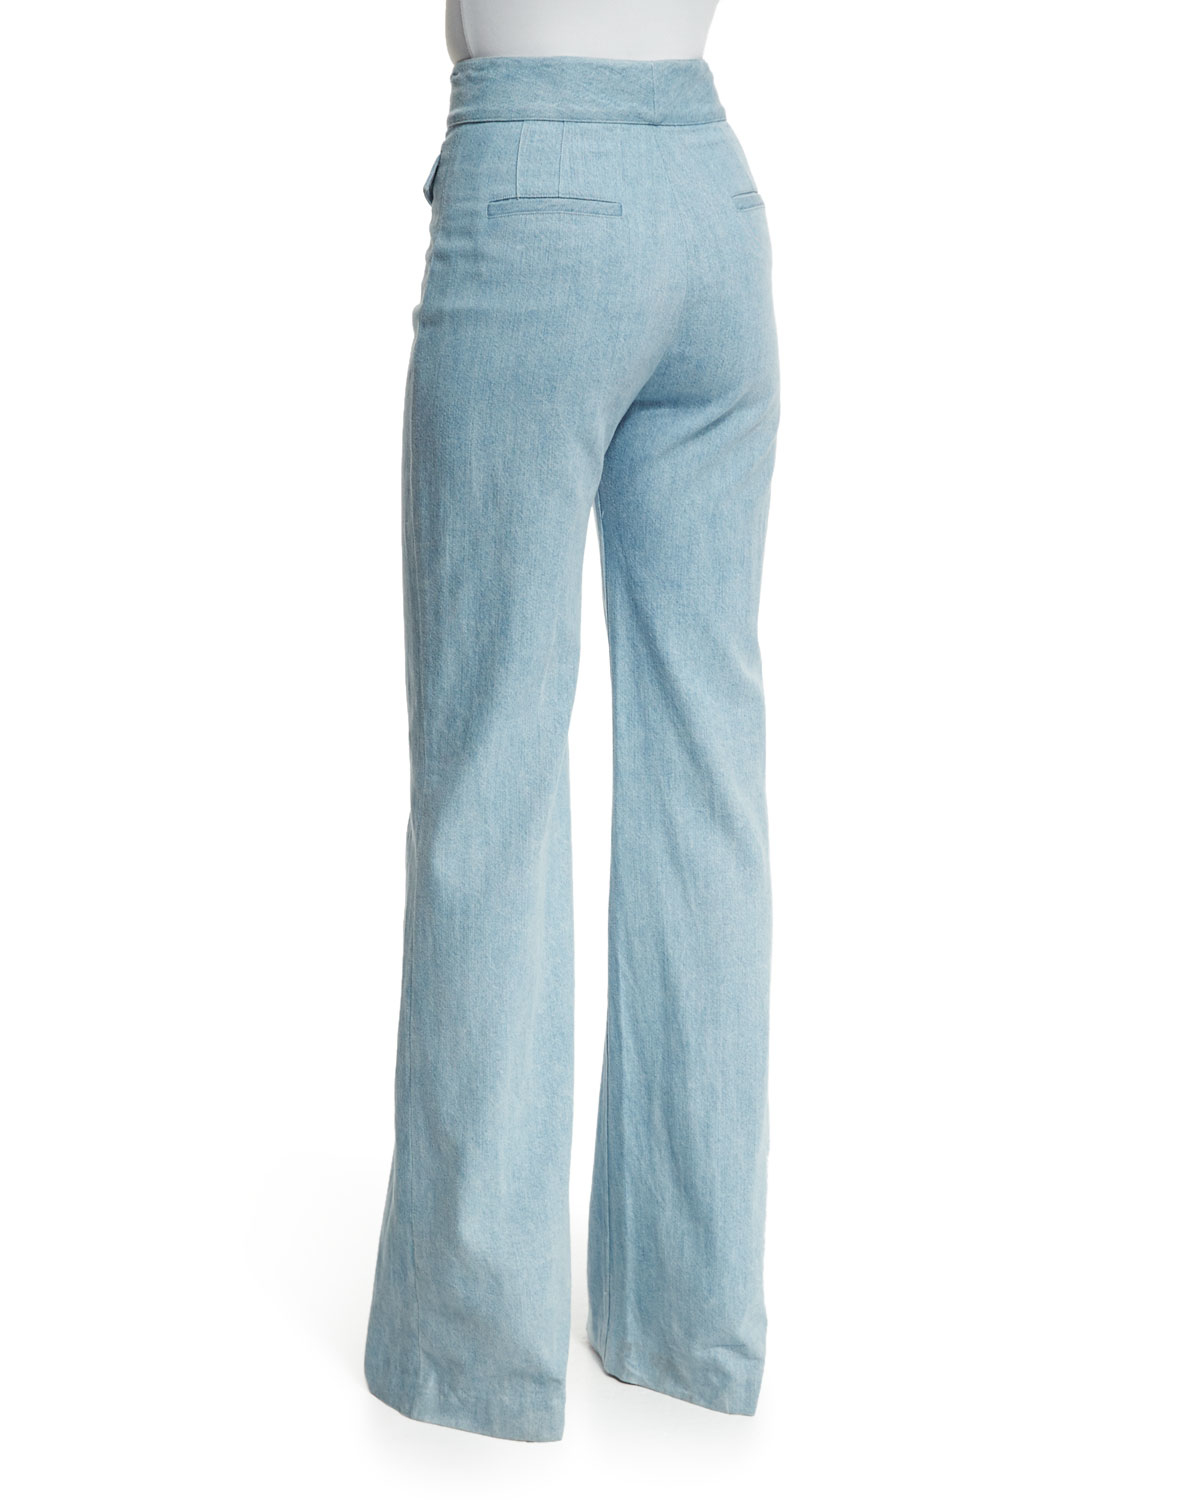 Womens high waisted bootcut jeans bandage style